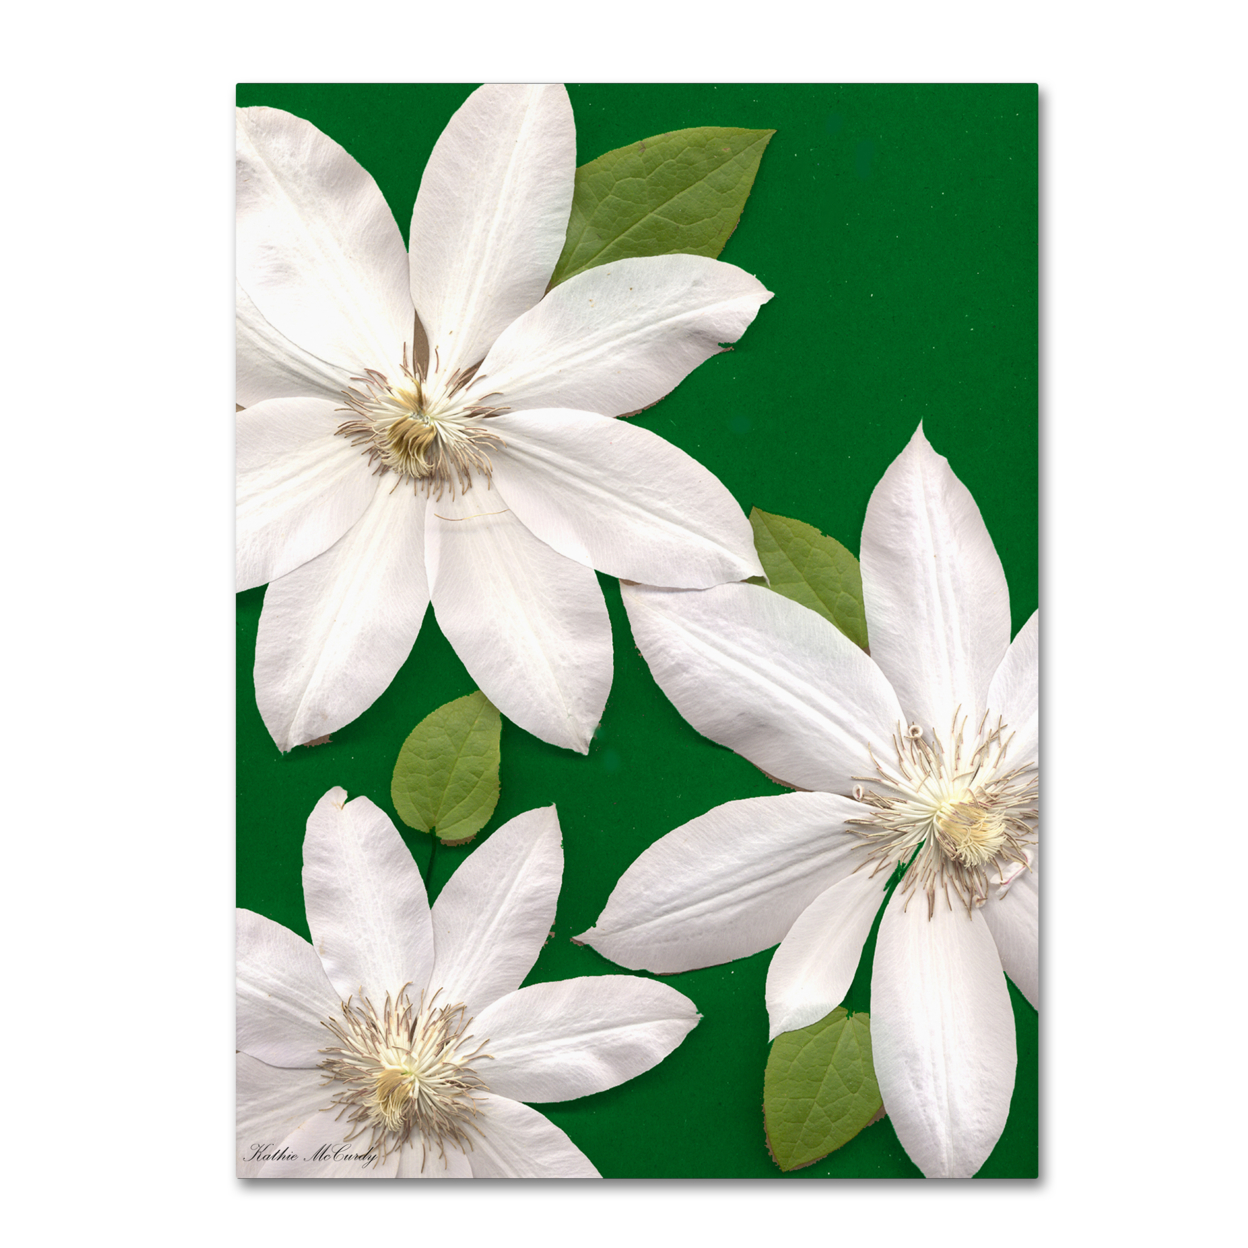 Kathie McCurdy 'White Clemantis' Canvas Wall Art 35 X 47 Inches